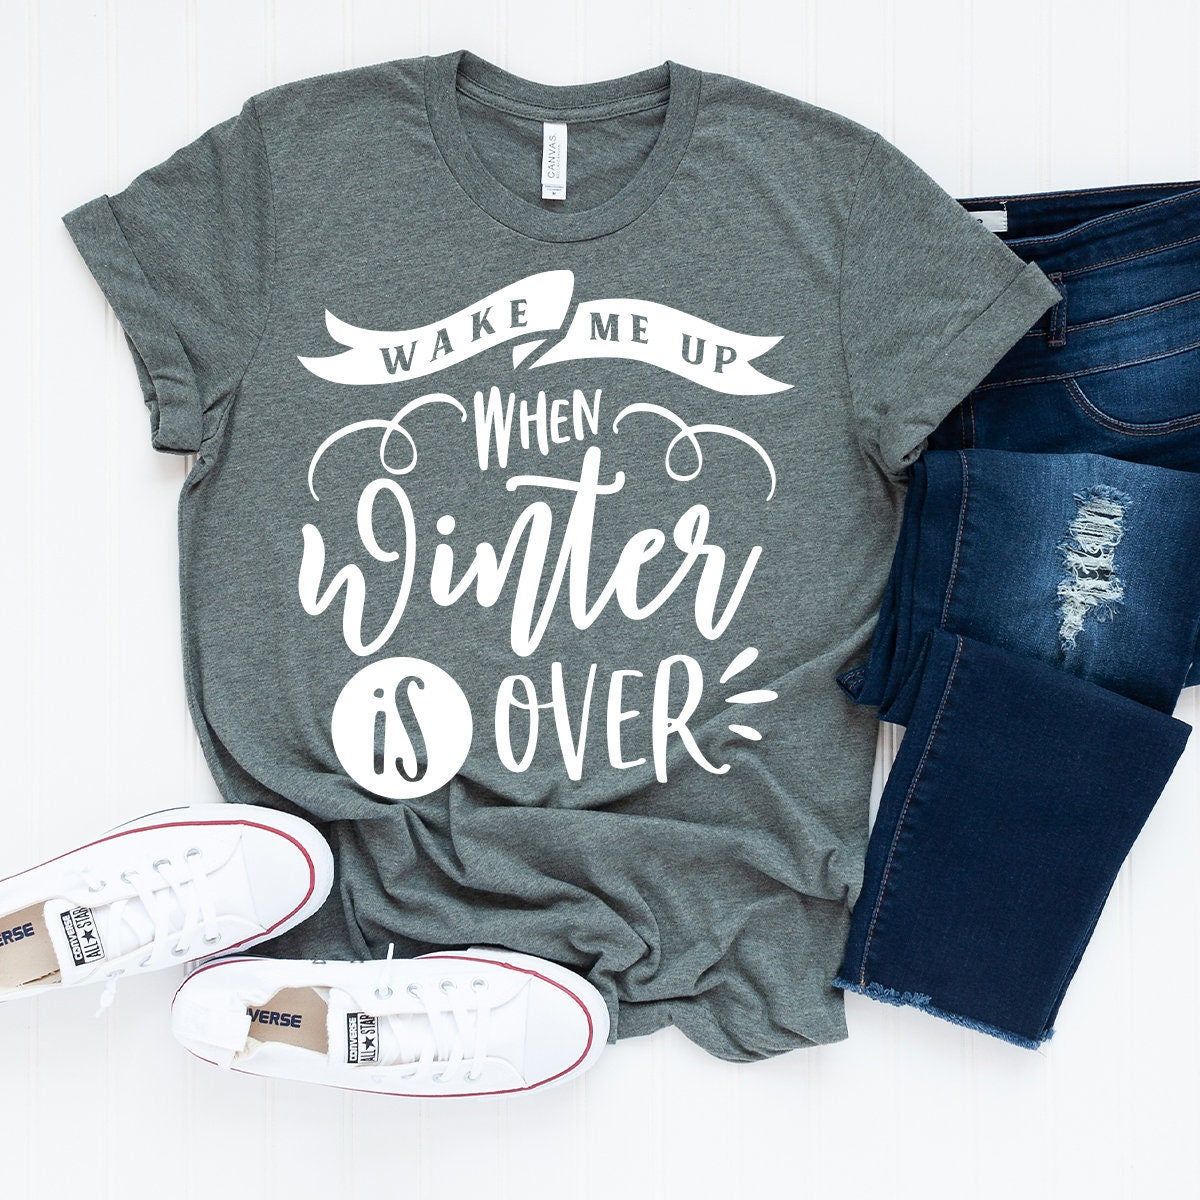 Wake Me Up When Winter Is Over T-Shirt, Winter Hater Tshirt, Funny Christmas Tee, Funny Winter Shirt, Sarcastic Christmas Gift Shirt - Fastdeliverytees.com